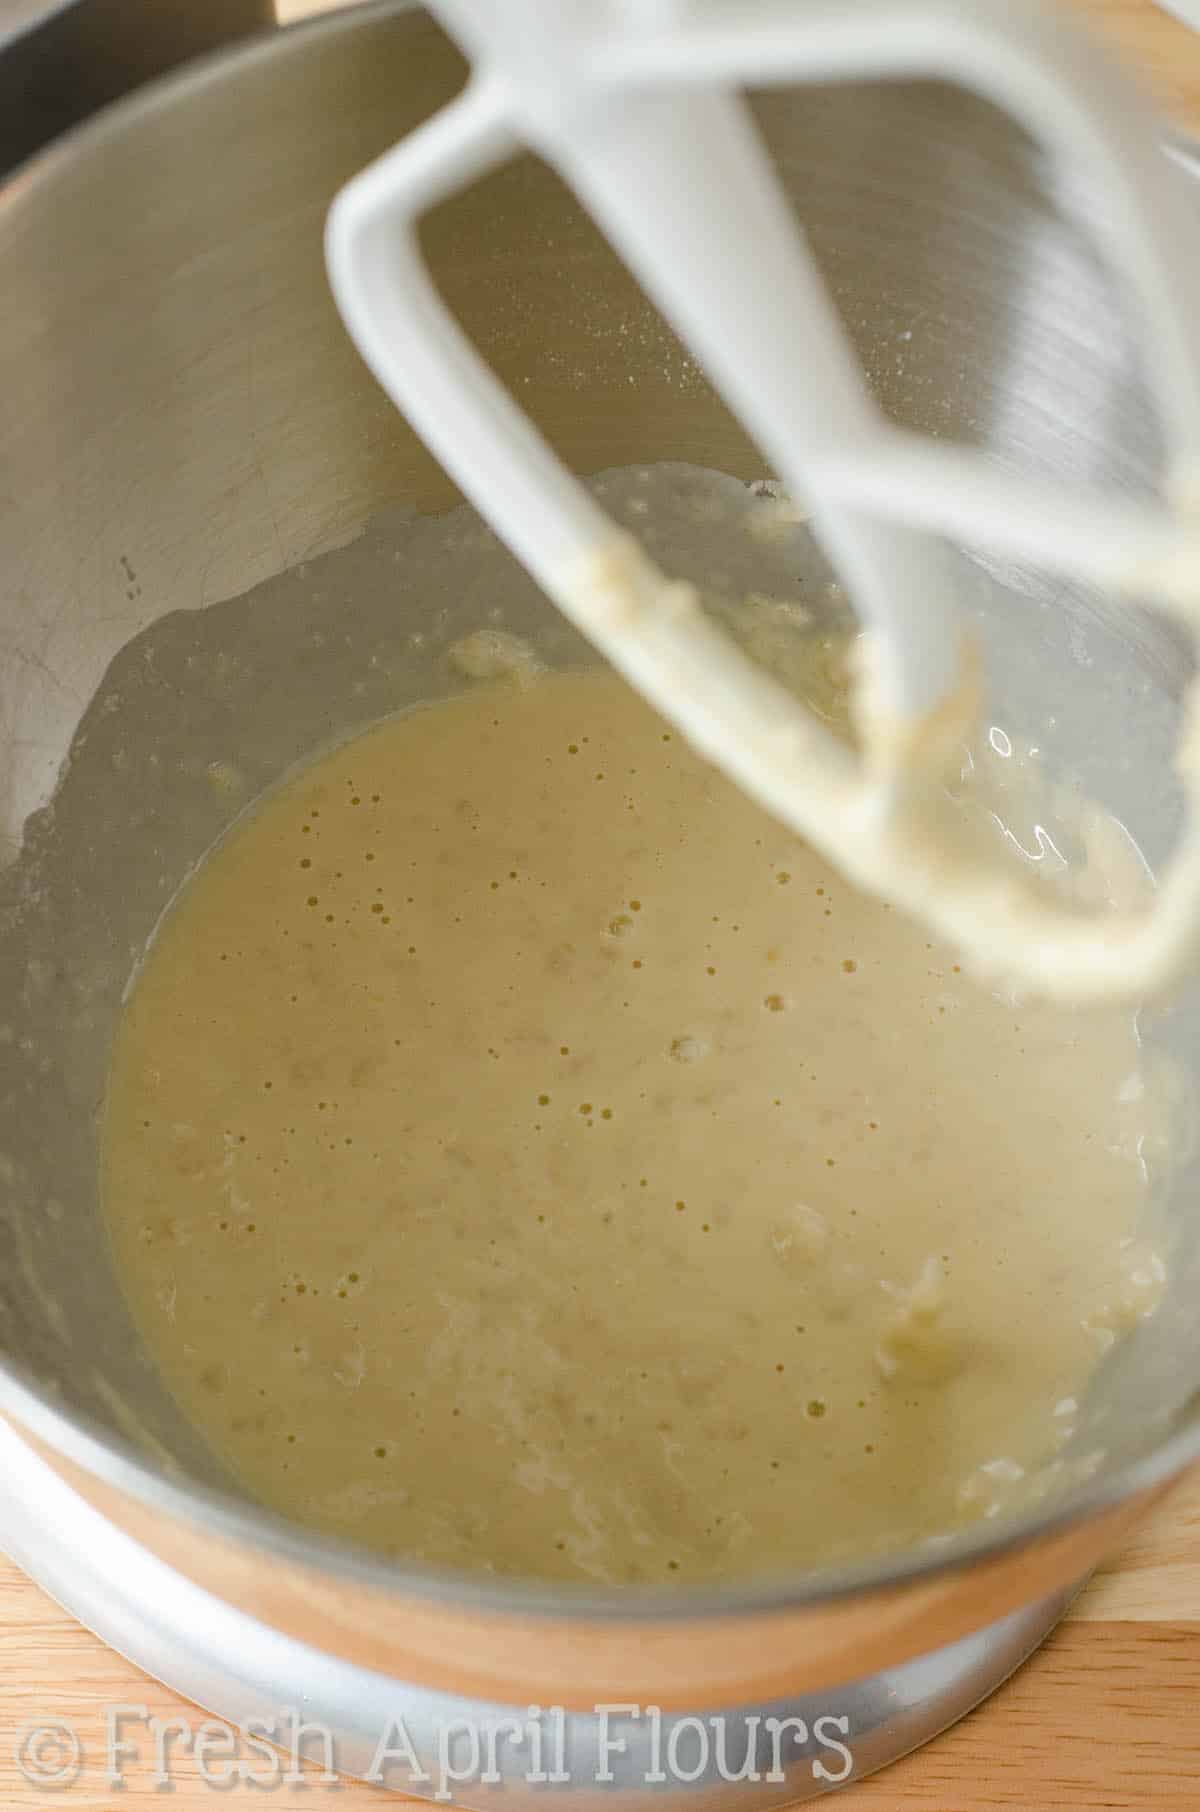 The start of dough for parmesan parsley bread in the bowl of a stand mixer.